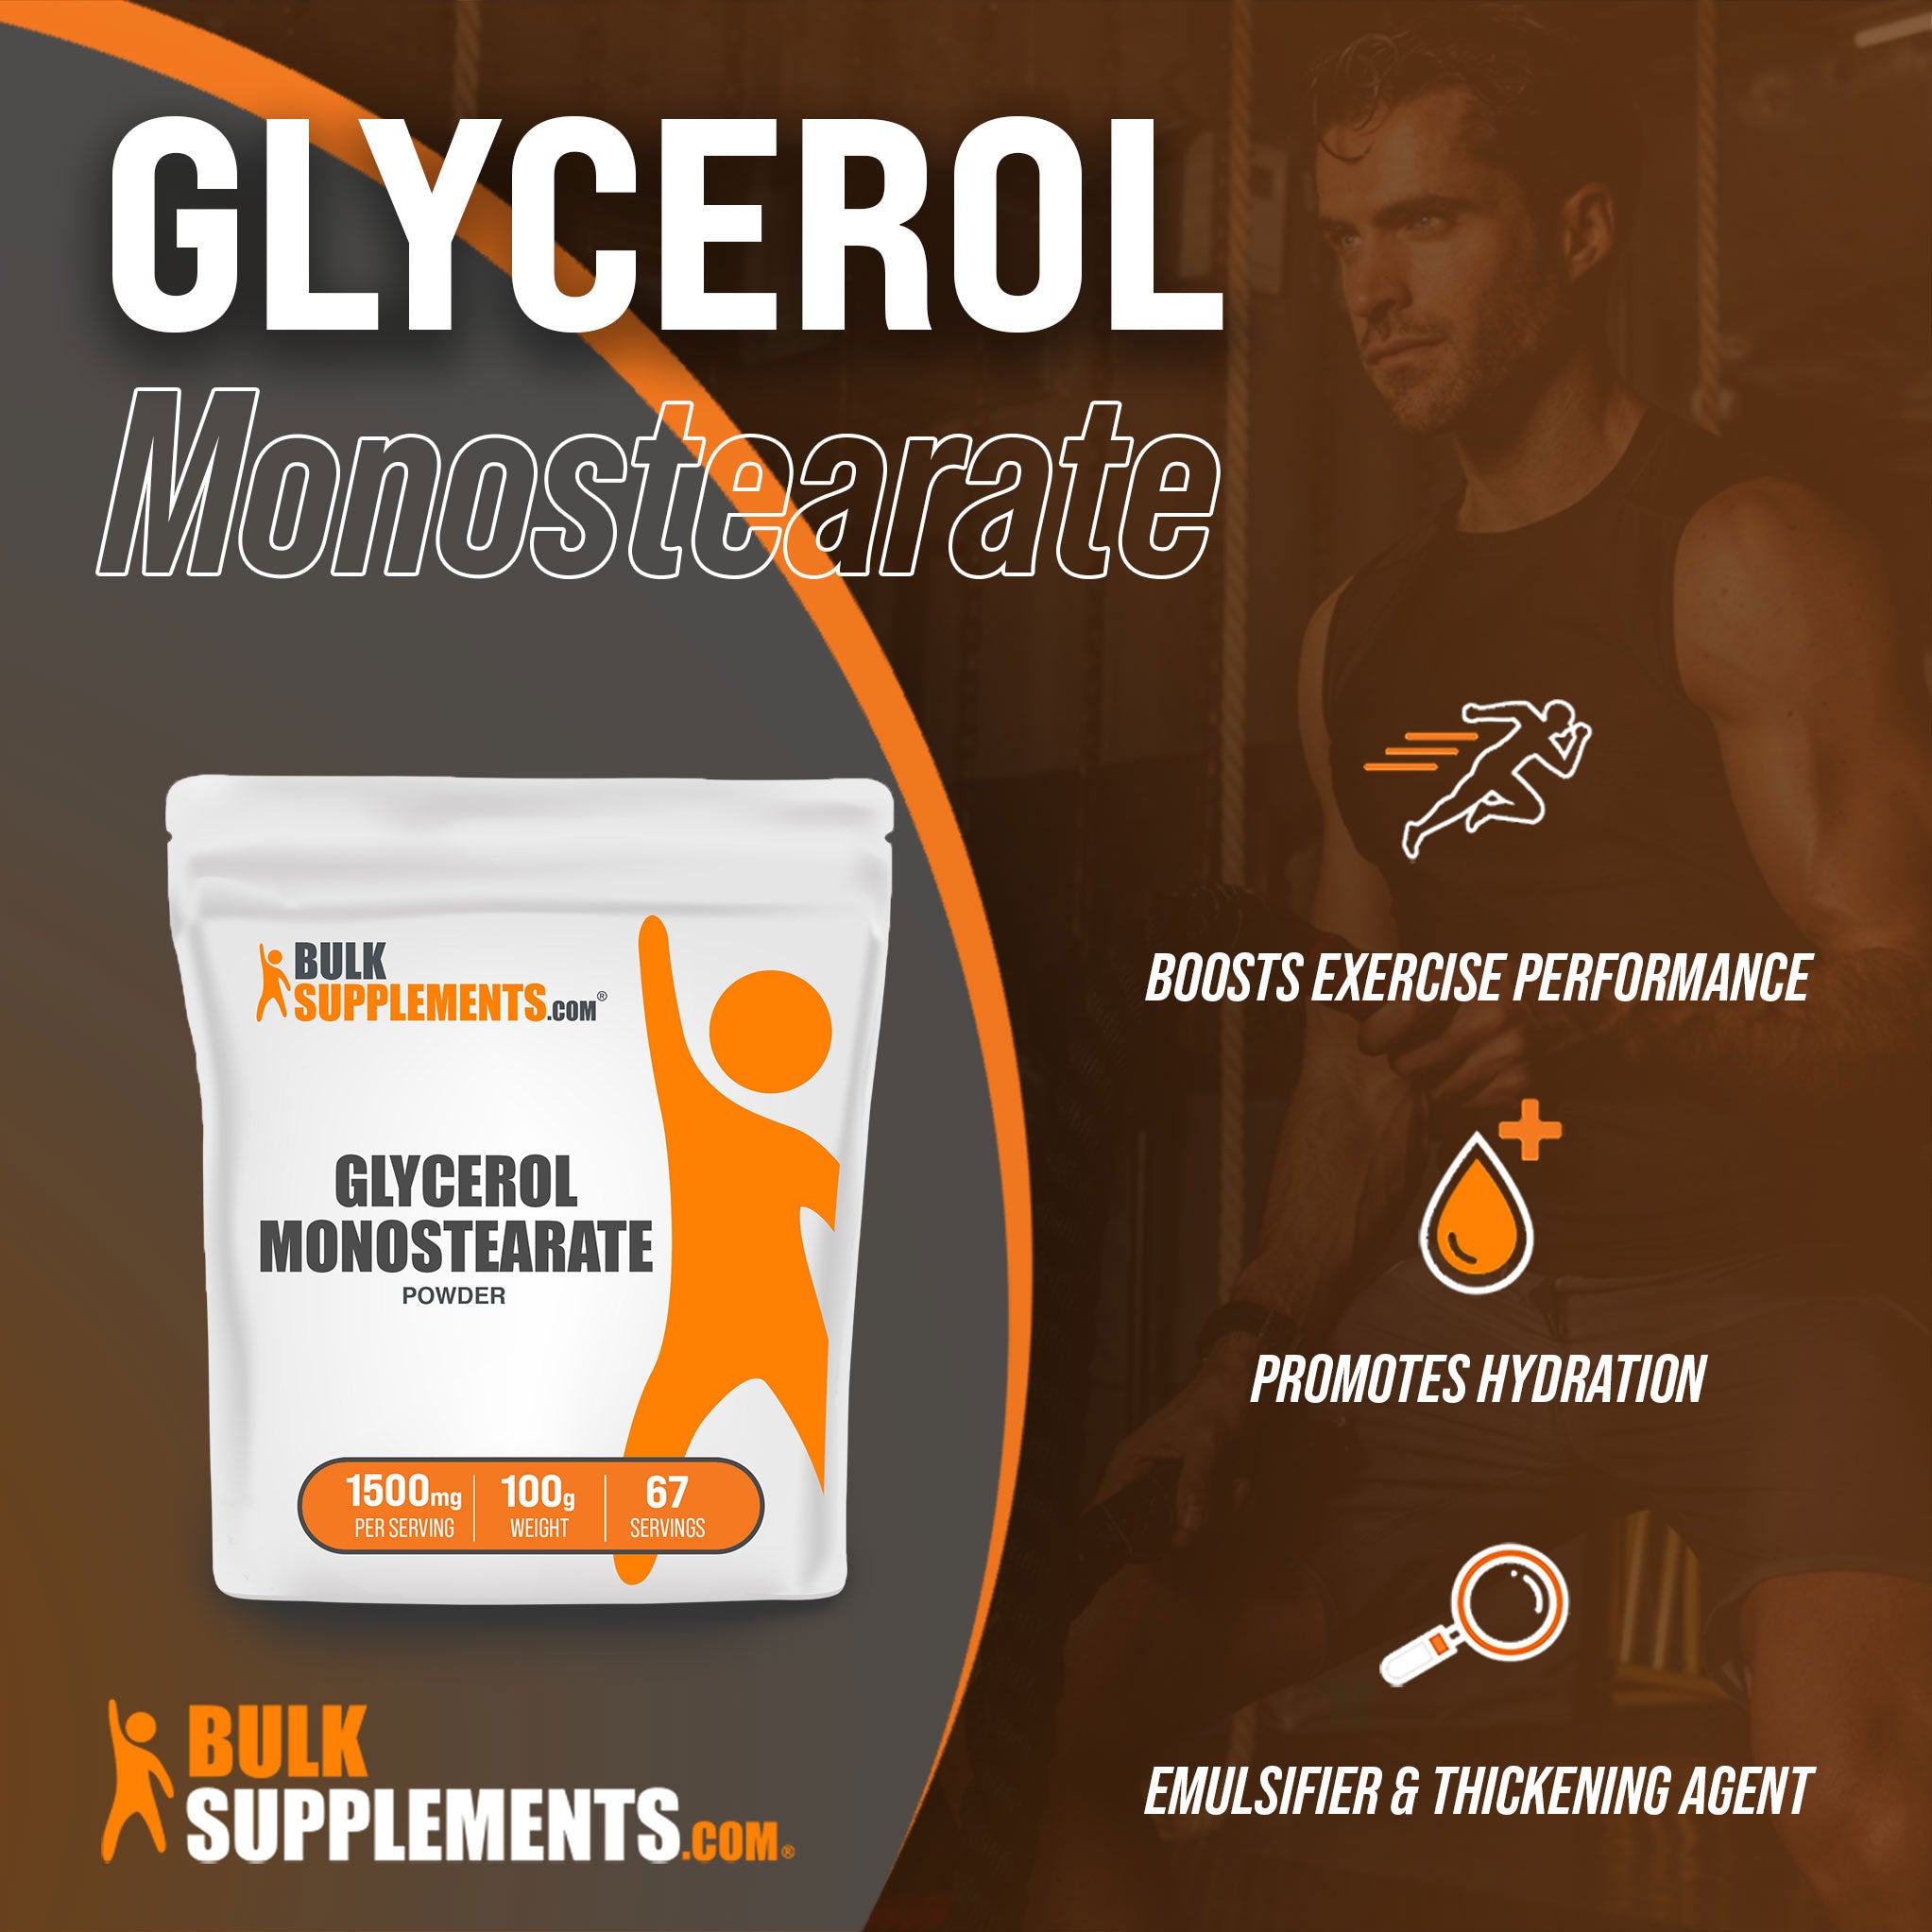 Benefits of Glycerol Monostearate; boosts exercise performance, promotes hydration, emulsifier and thickening agent